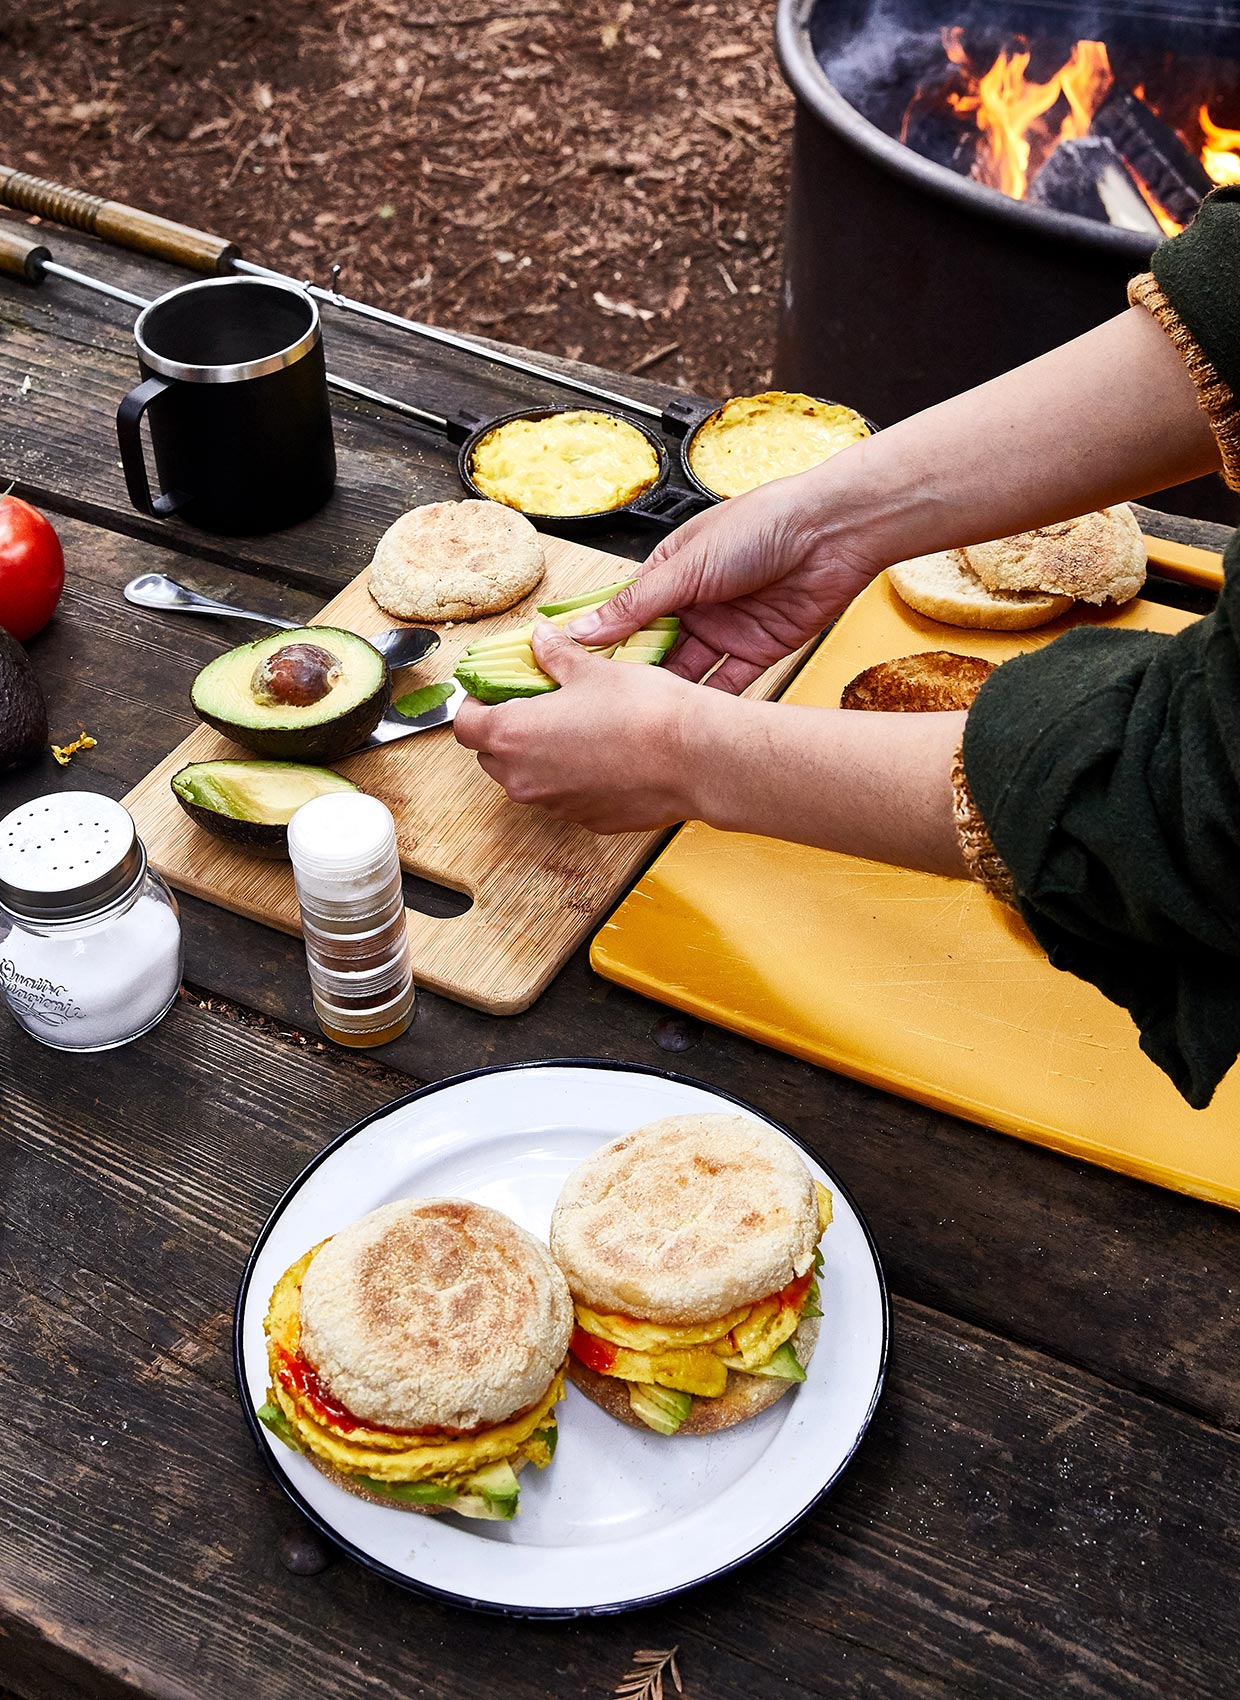 Camping-Shoot-Sandwiches-breakfast-picnic